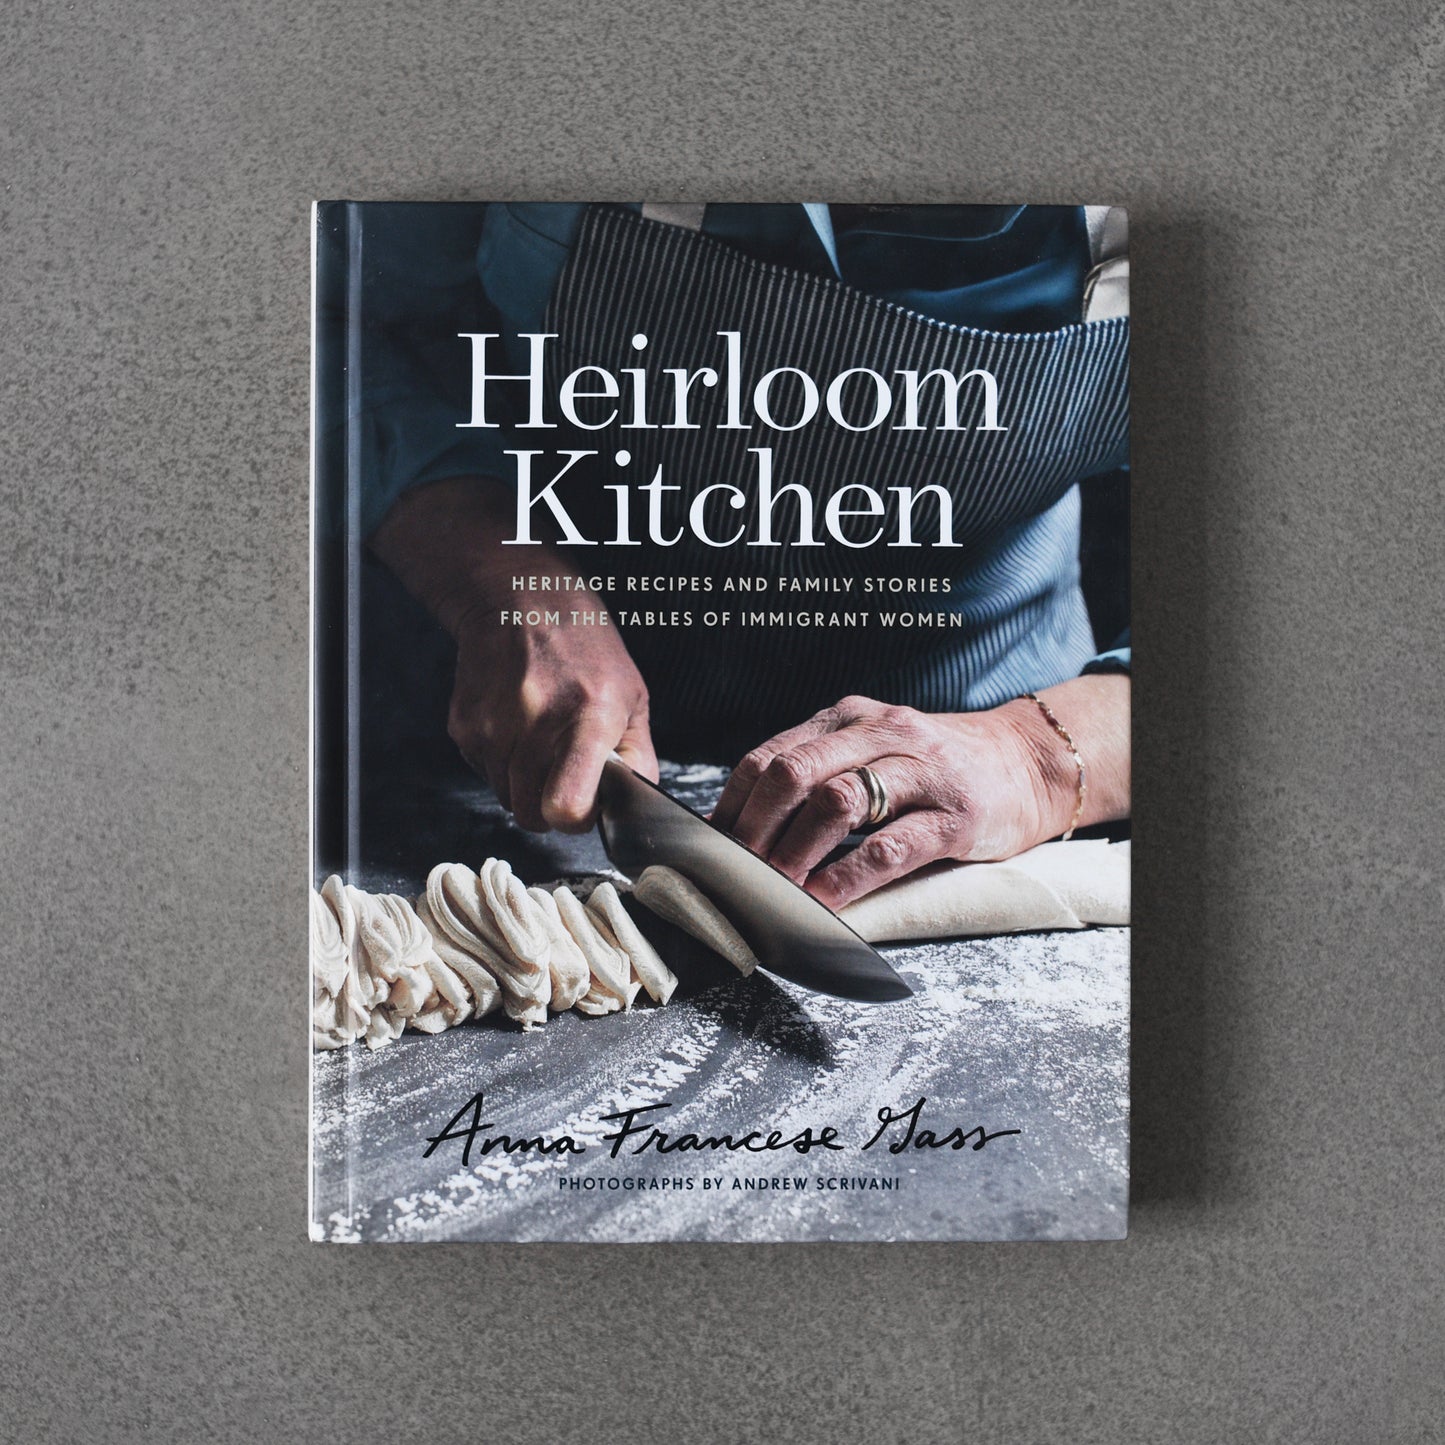 Heirloom Kitchen: Heritage Recipes and Family Stories from the Tables of Immigrant Women